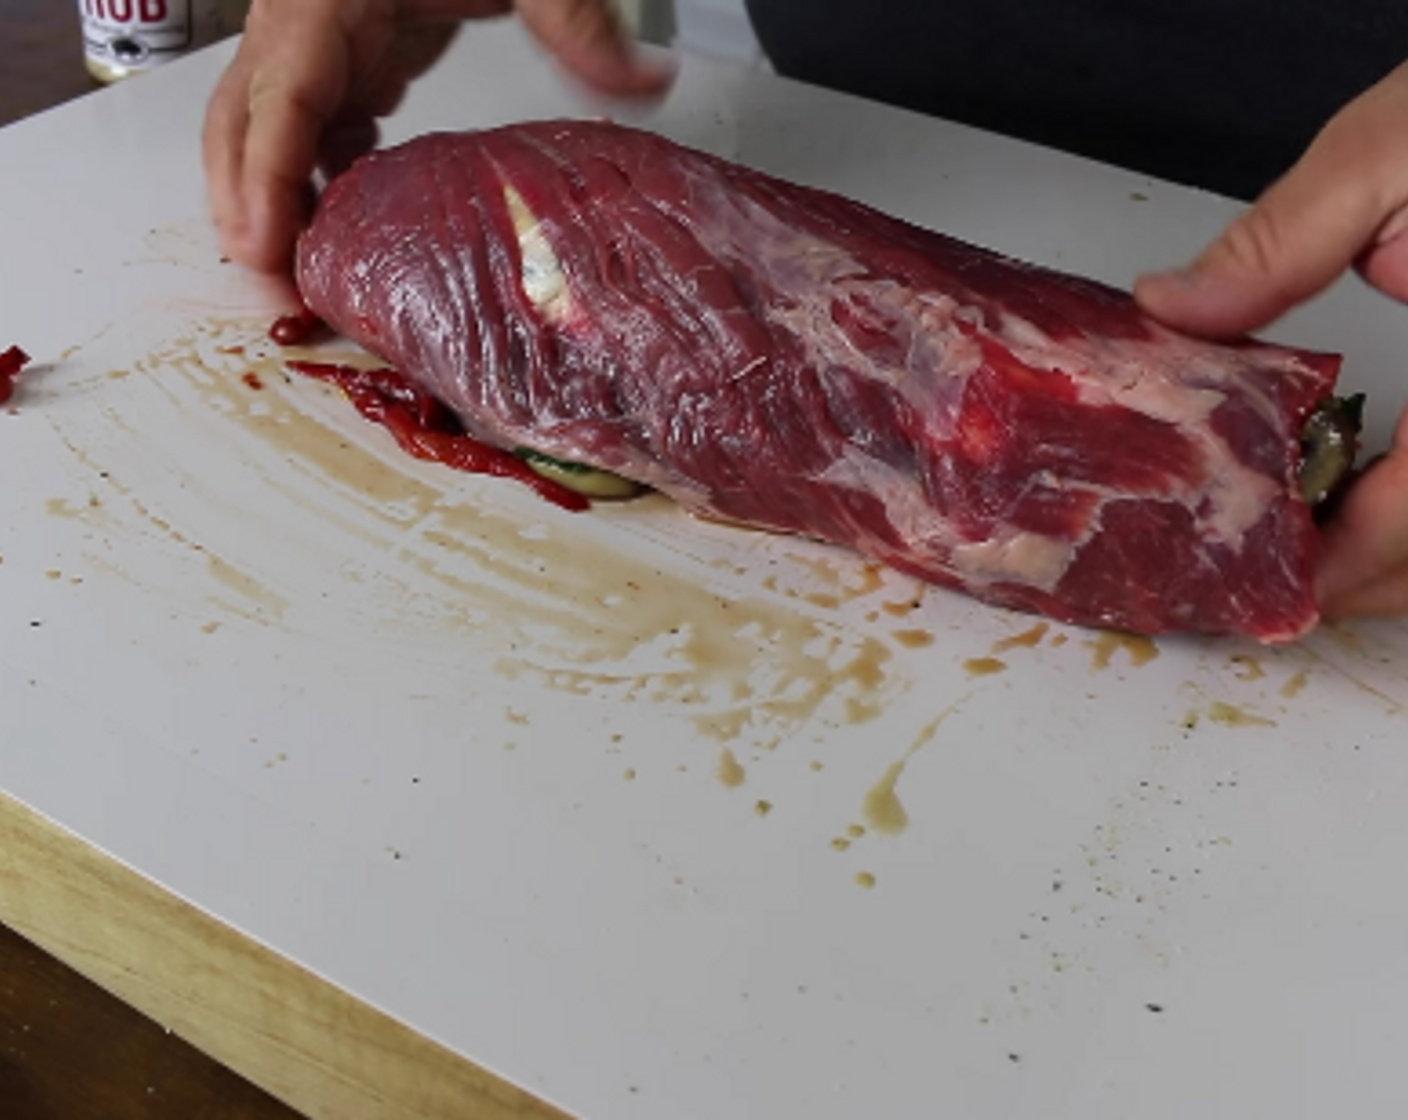 step 6 Tightly roll the flank steak using your fingers to keep the stuffing inside. Leave it seam down on the cutting surface.